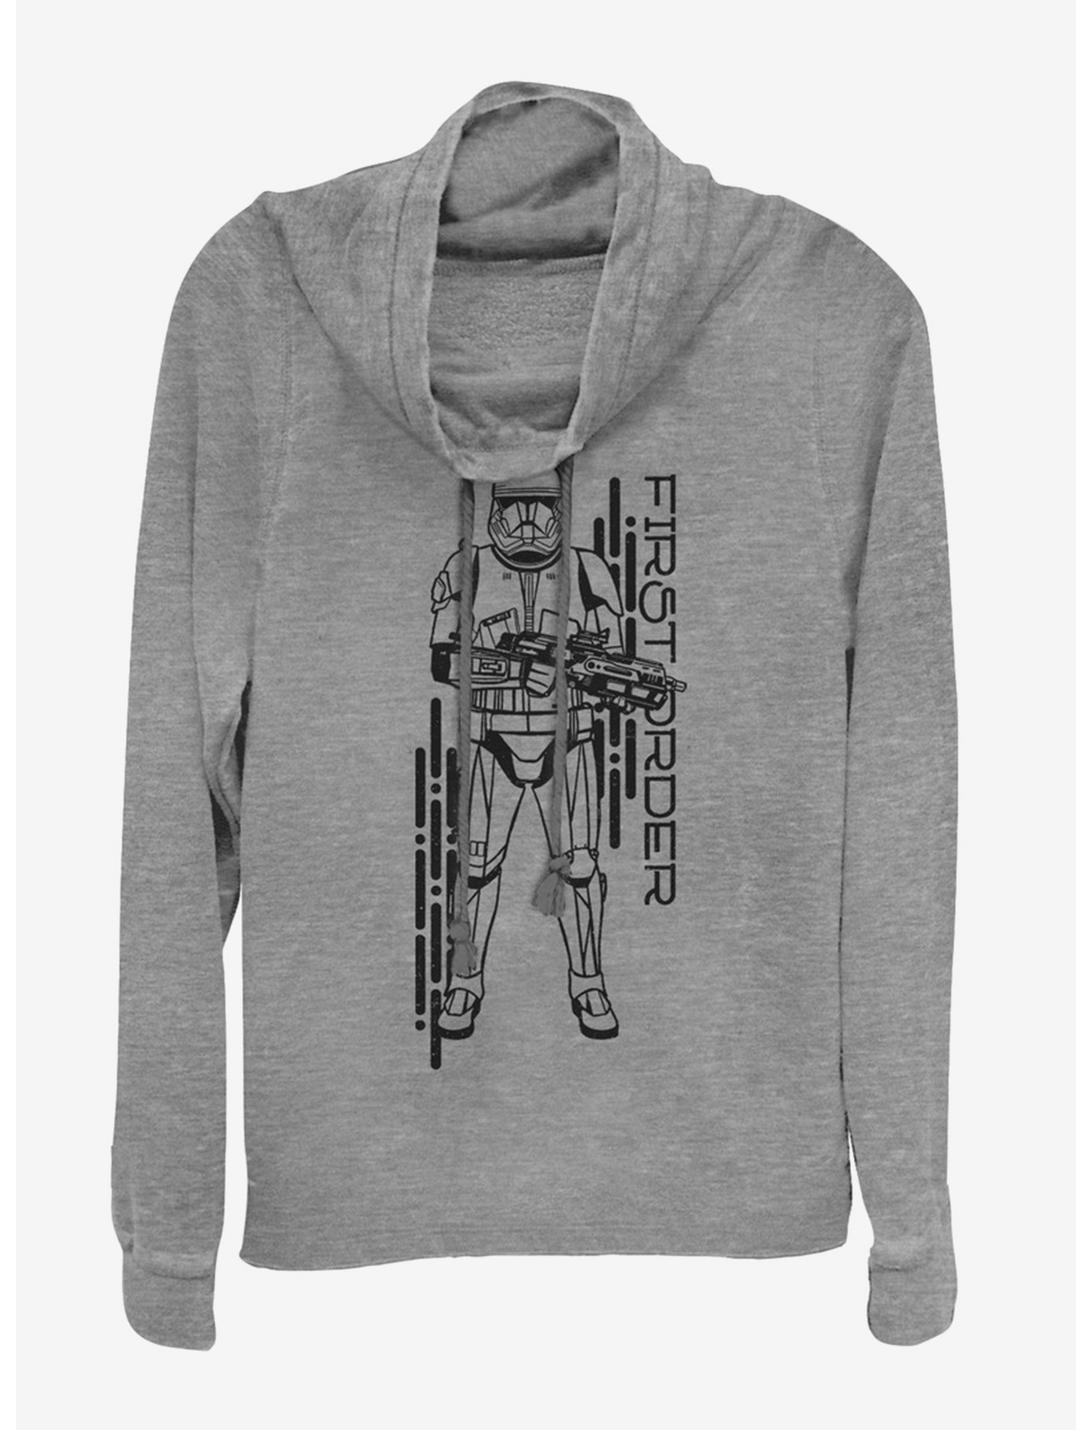 Star Wars Episode IX The Rise Of Skywalker Project Red Cowlneck Long-Sleeve Womens Top, GRAY HTR, hi-res